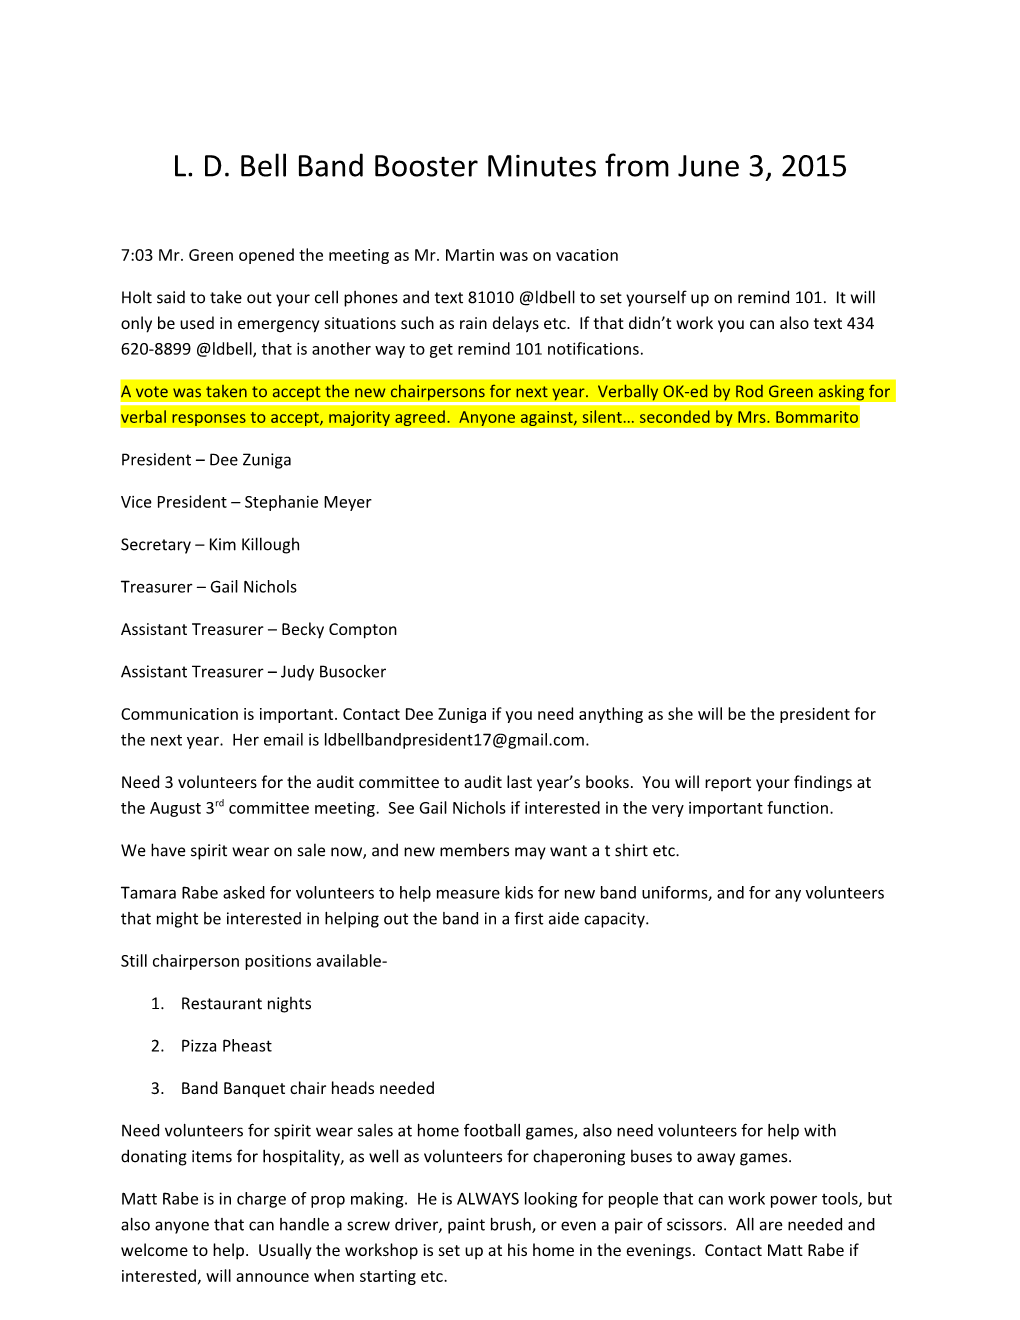 L. D. Bell Band Booster Minutes from June 3, 2015